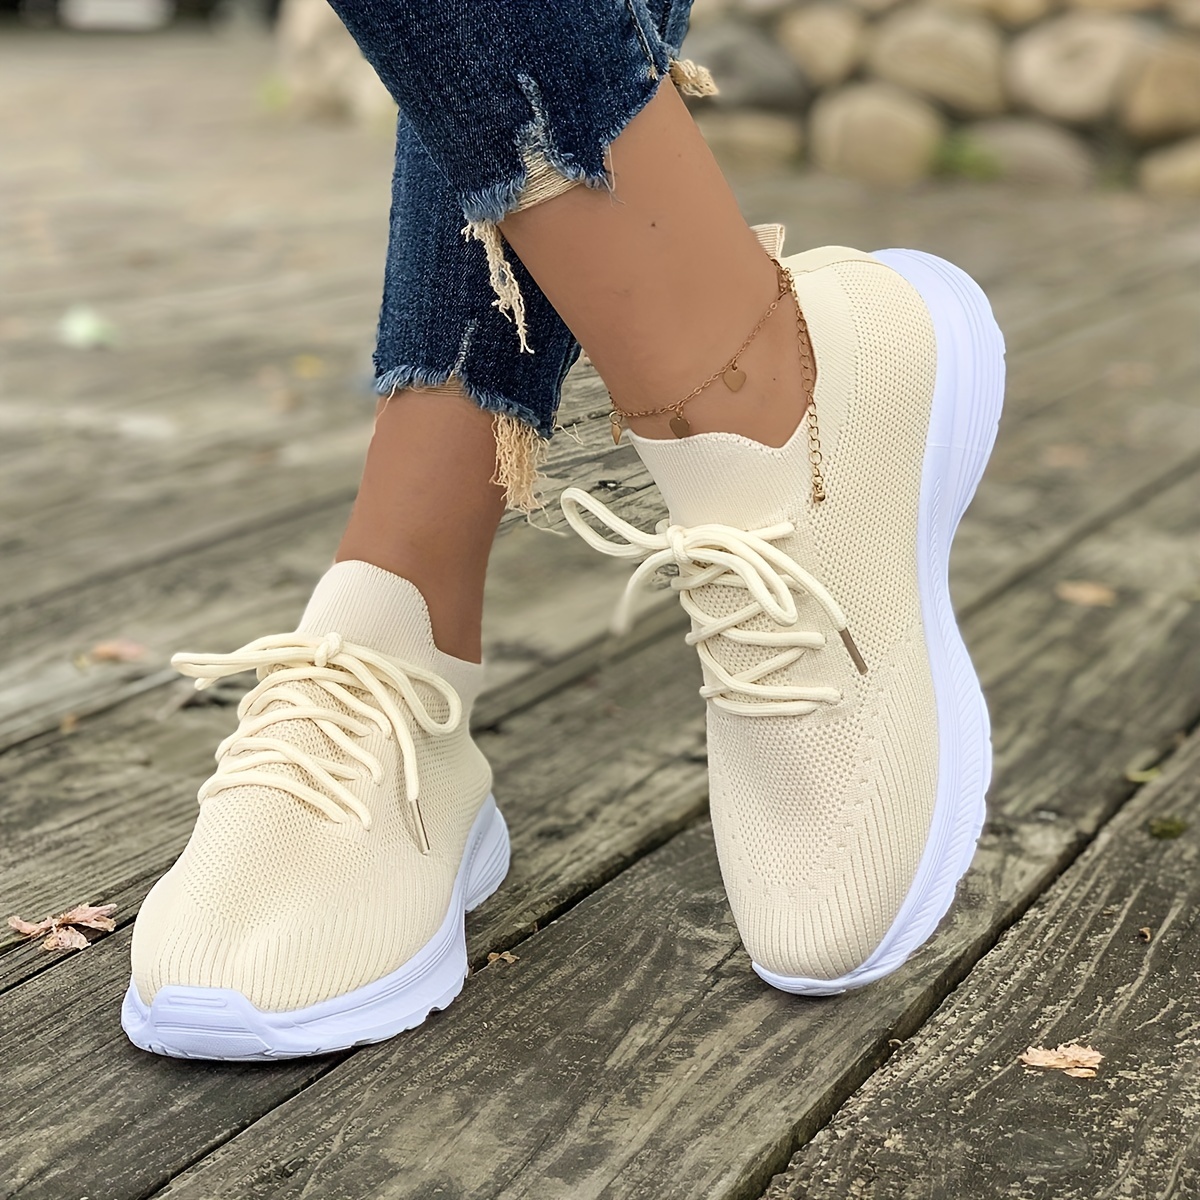 Athletic Works Brand Shoes Women Breathable Lace Up Shoes Flats Casual  Shoes Unisex Sneaker Sock Shoes for Women